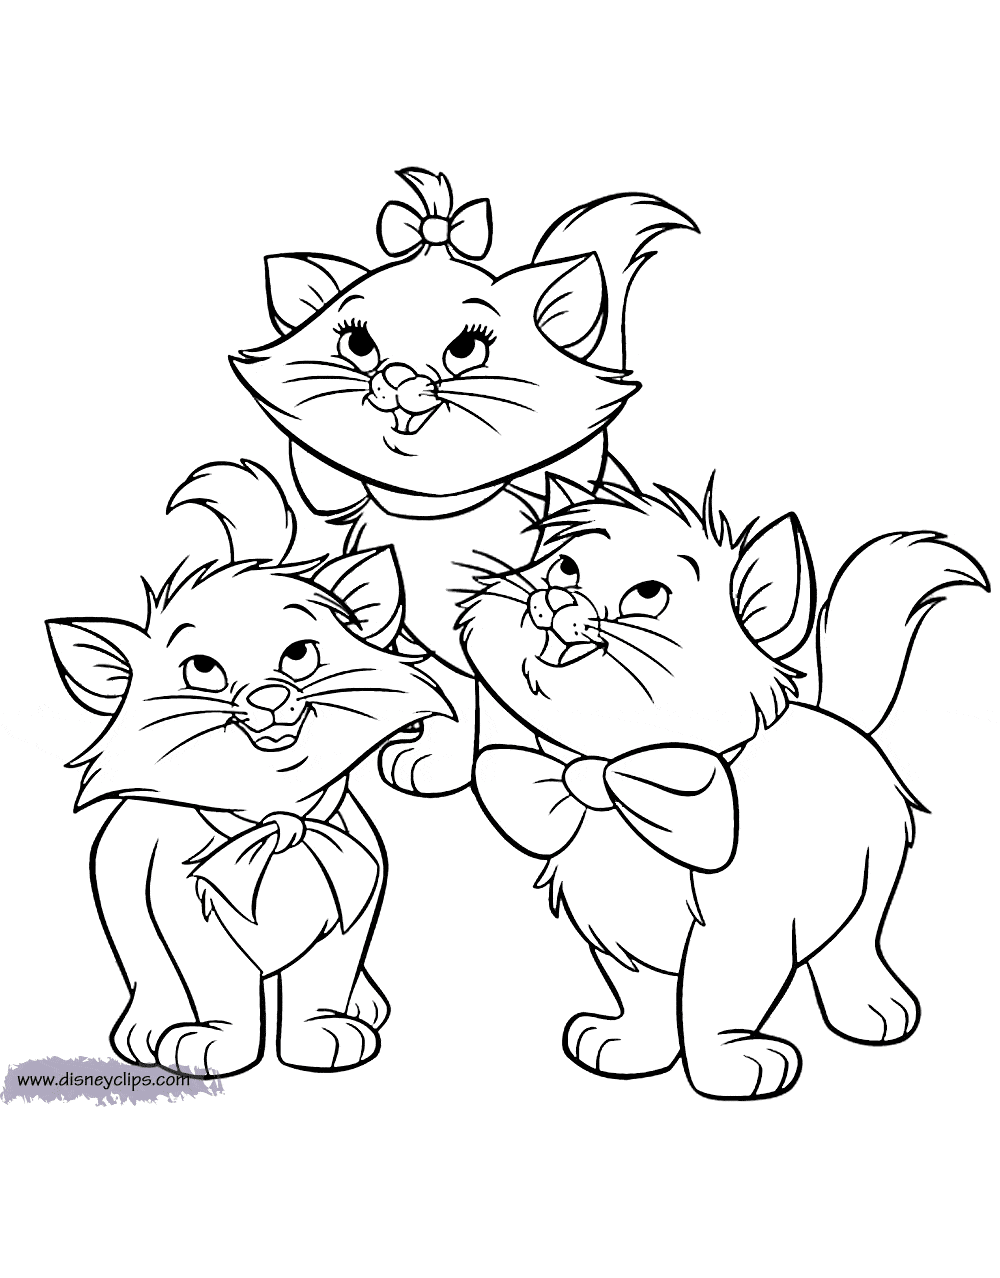 The Aristocats Printable Coloring Pages Disney Princess Coloring Pages Cat Coloring Page Horse Coloring Pages